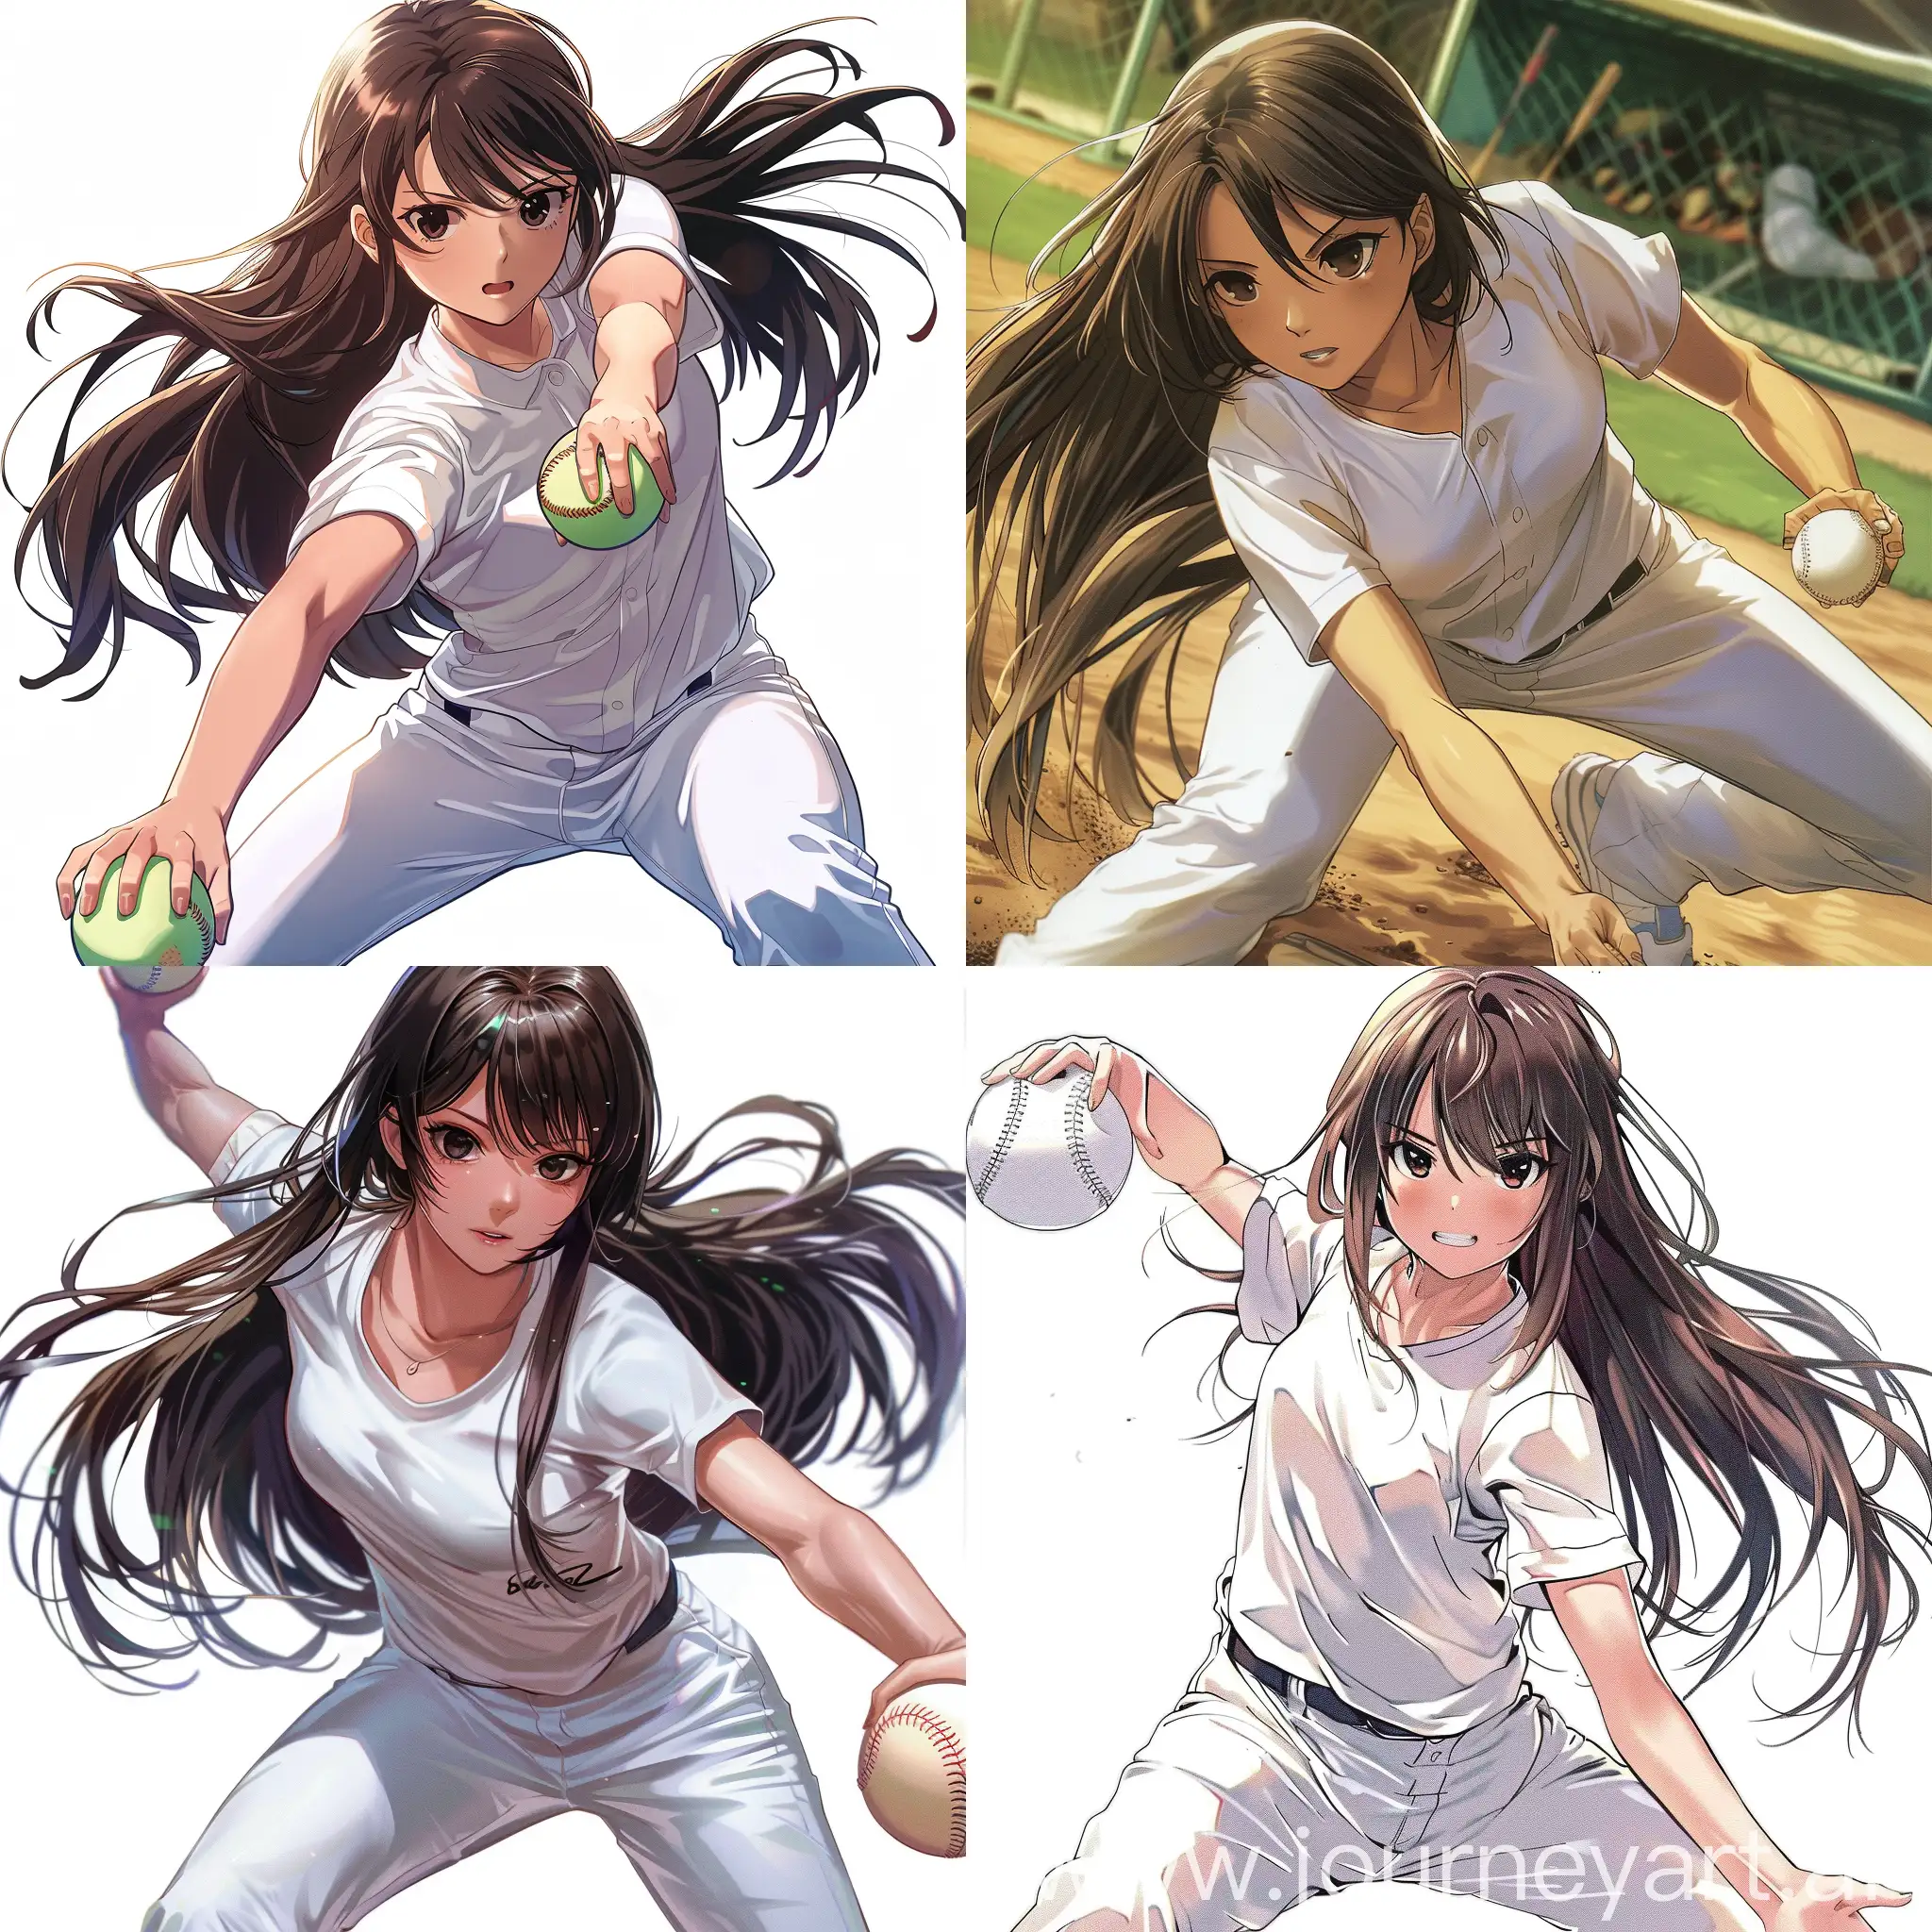 a girl with long brown hair, dark eyes. she is playing softball. she has a white t shirt and white pants